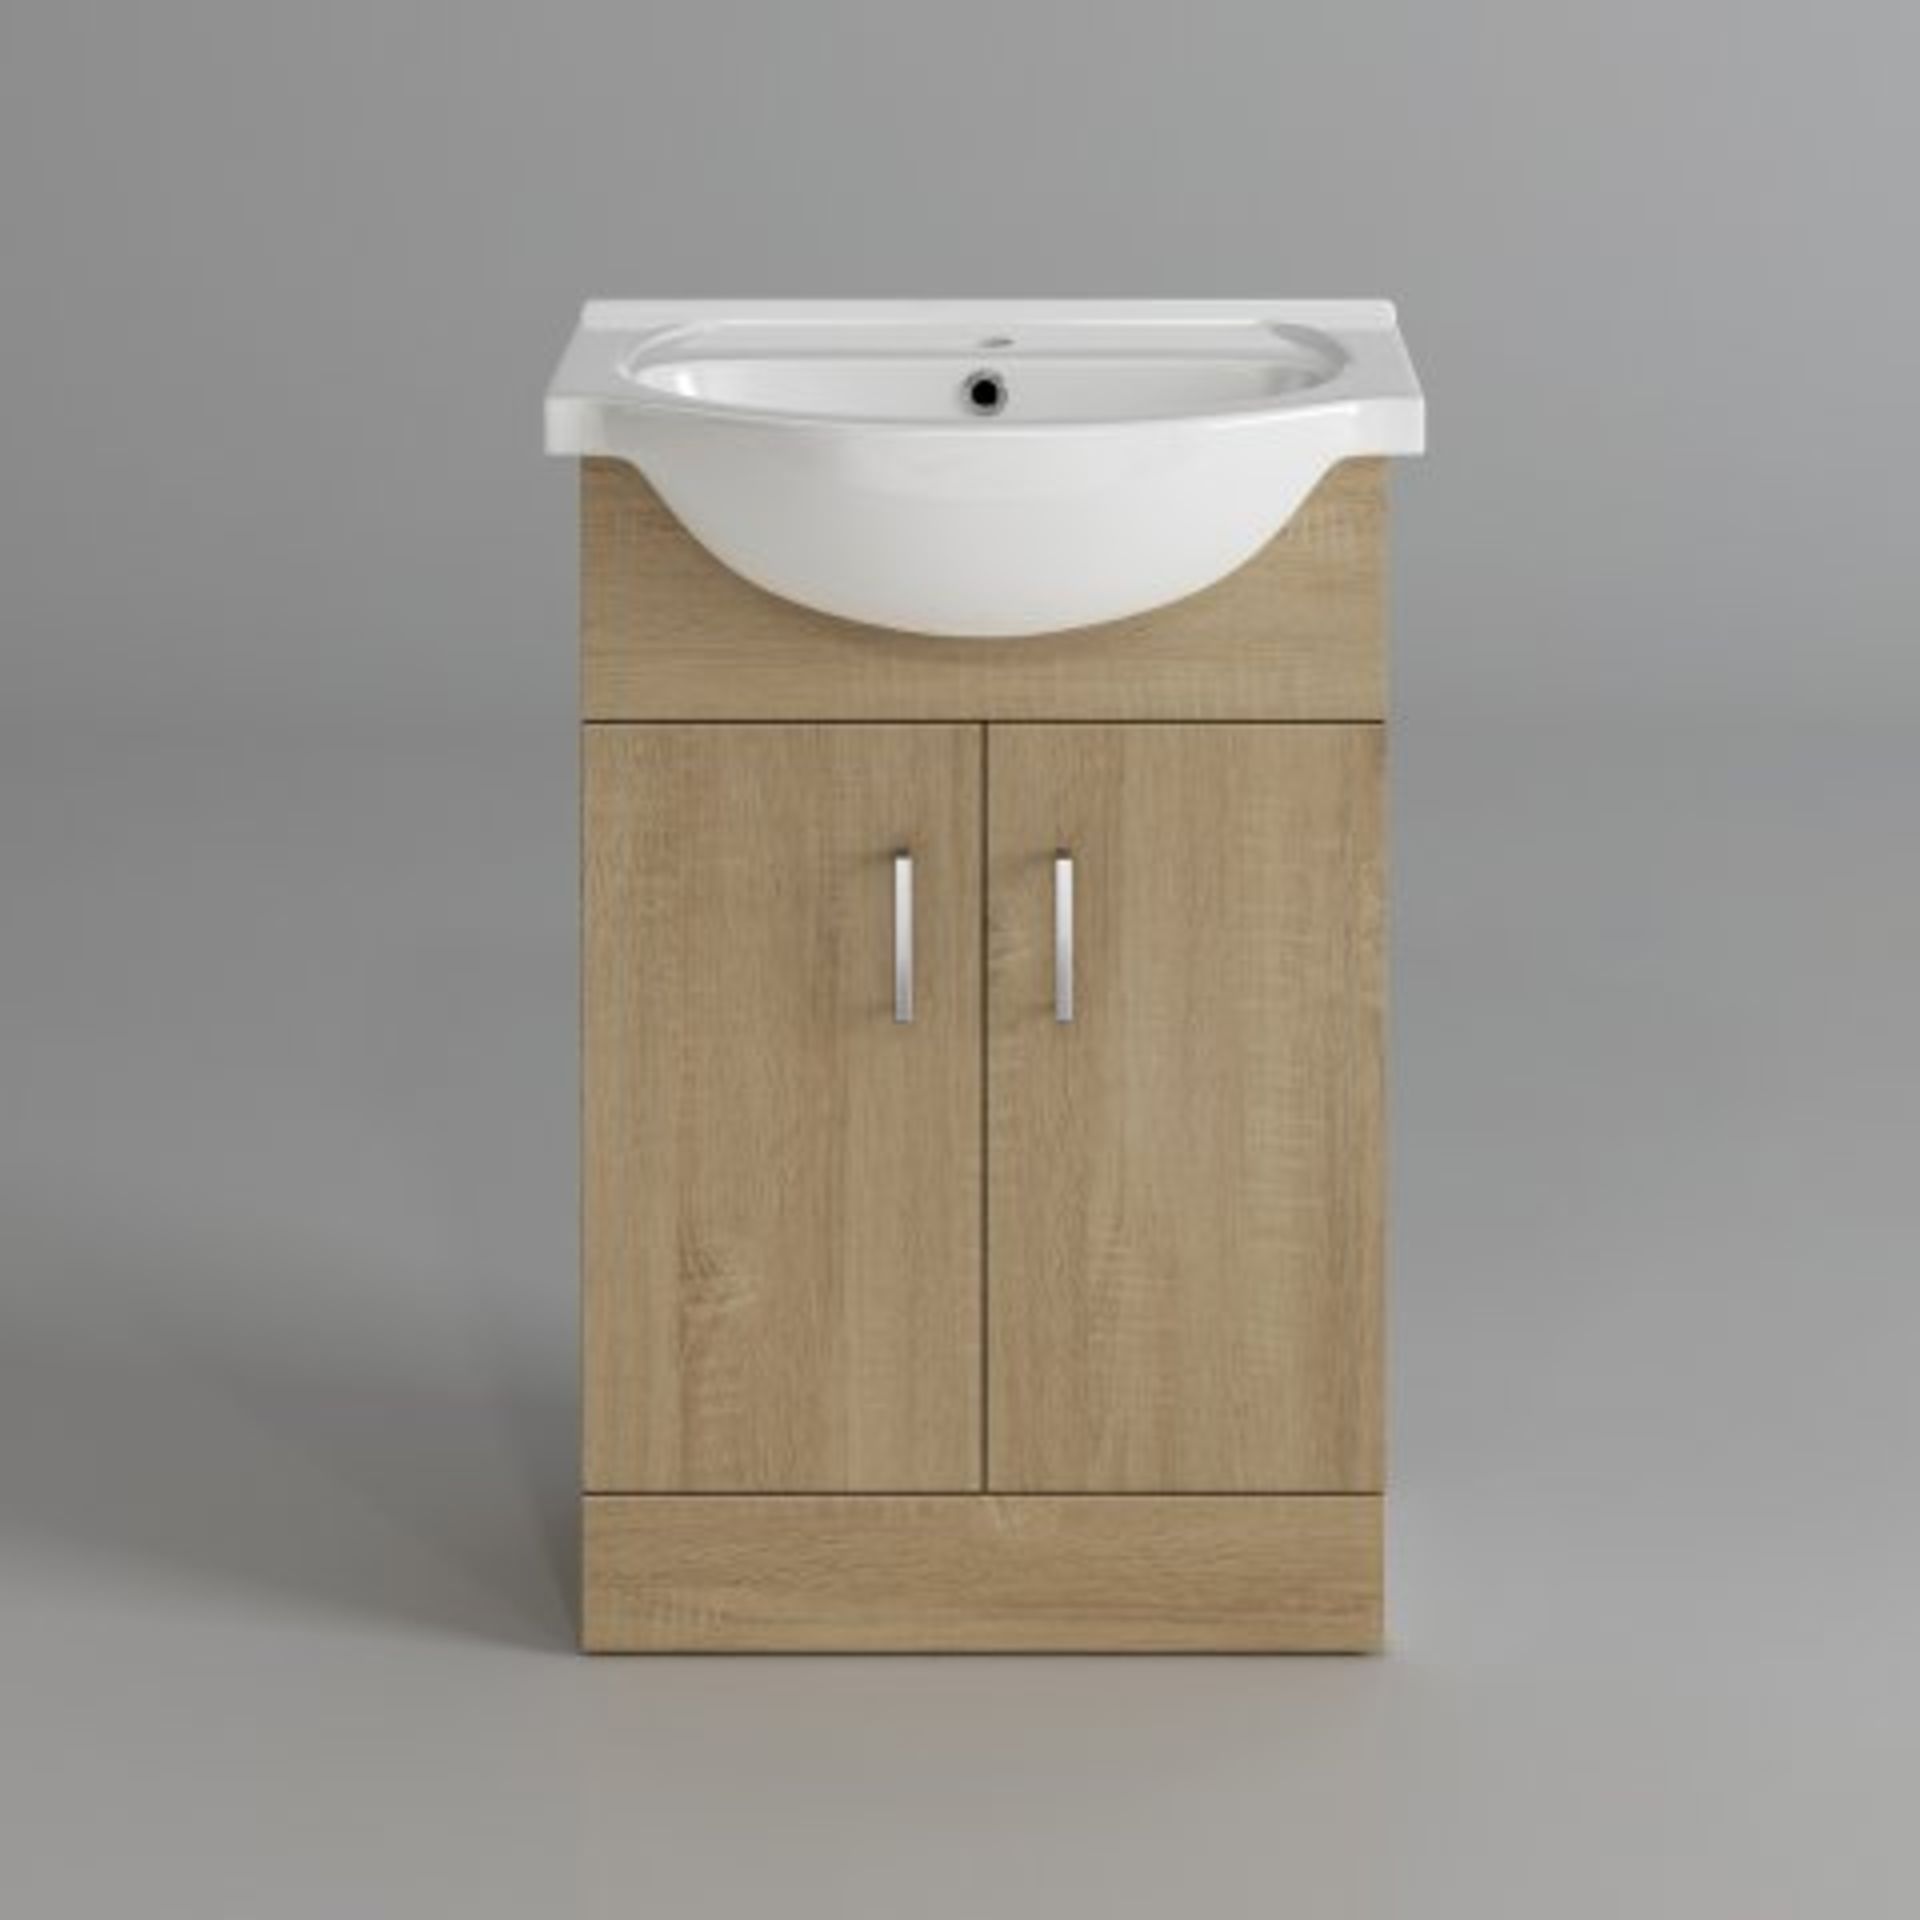 (34) 550x300mm Quartz Oak Effect Built In Basin Cabinet. RRP £299.99. COMES COMPLETE WITH BASIN. - Image 4 of 4